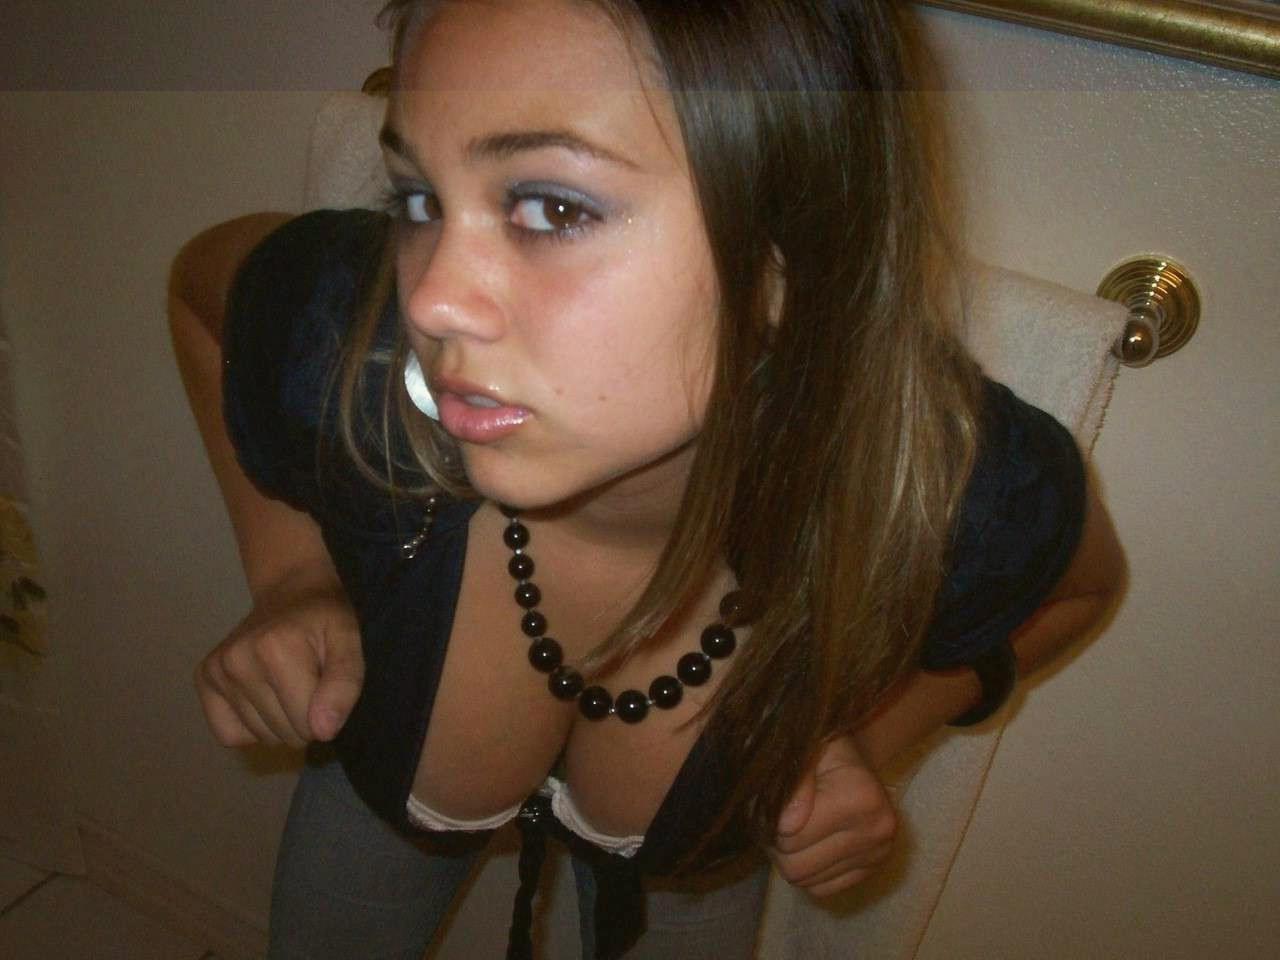 Sweaty Latina girl with beautiful tits shows them off in sexy clothes Photo